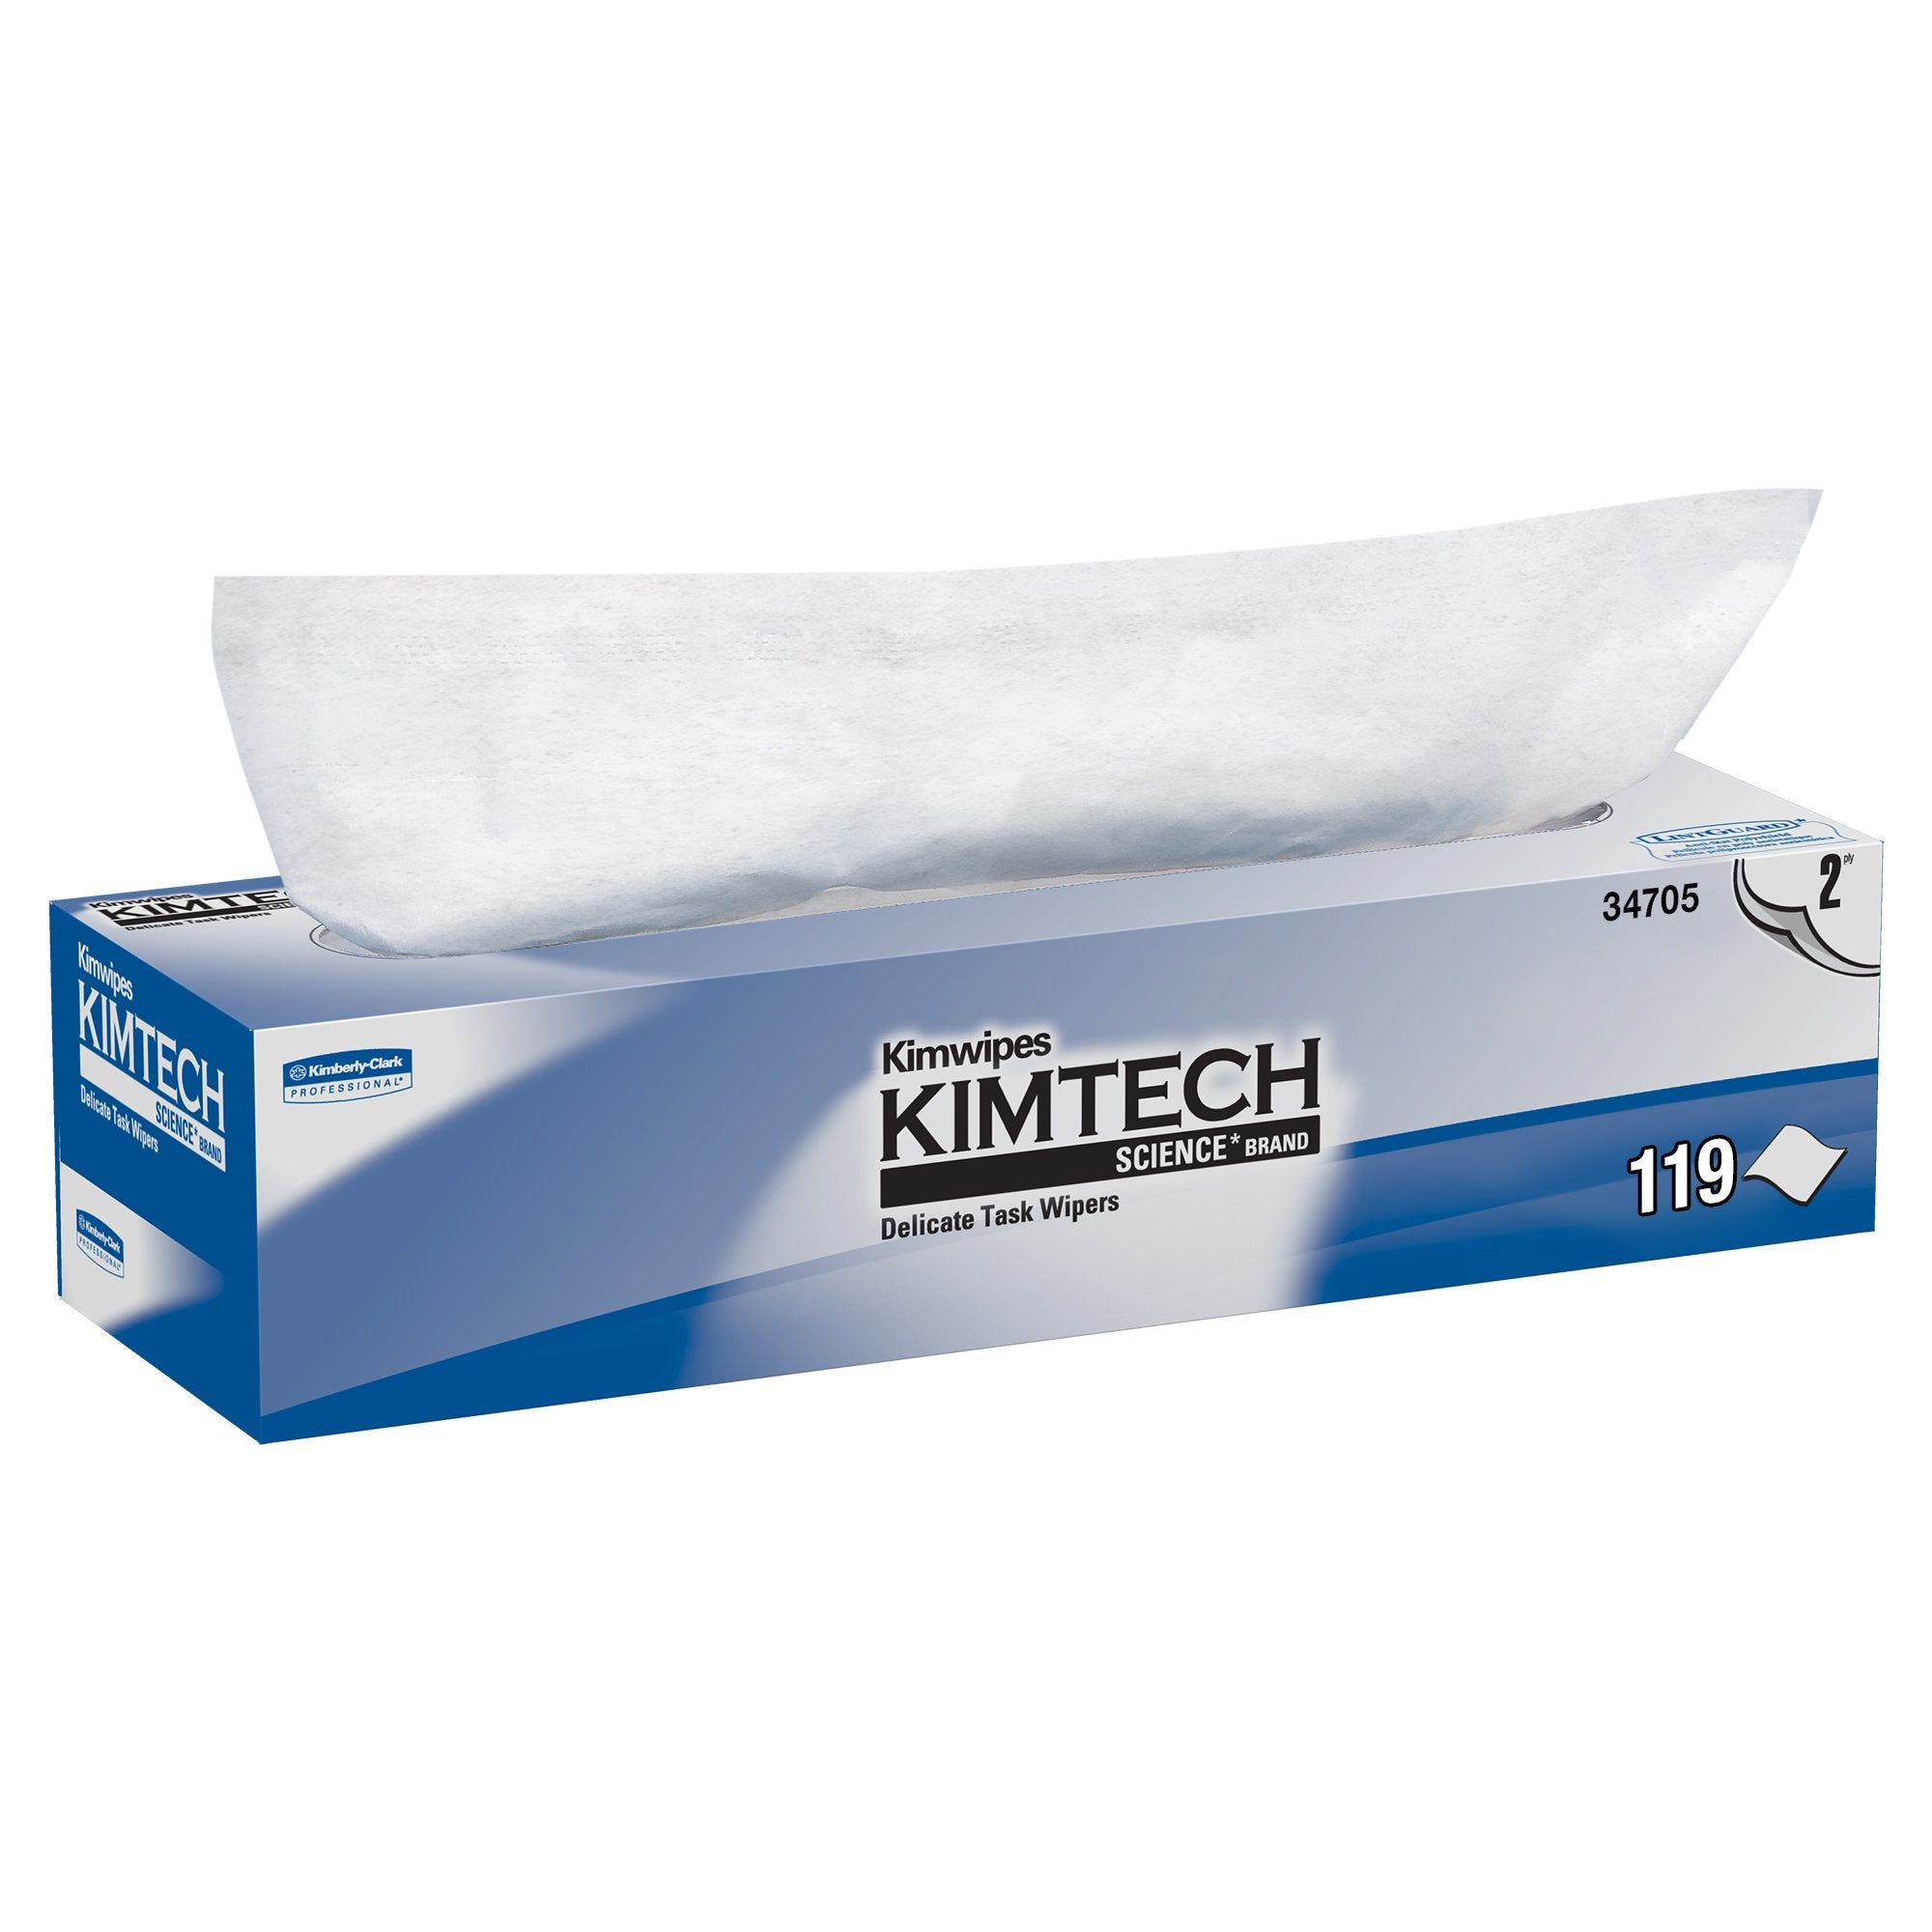 Delicate Task Wipe Kimtech Science Kimwipes Light Duty White NonSterile 2 Ply Tissue 11-4/5 X 11-4/5 Inch Disposable